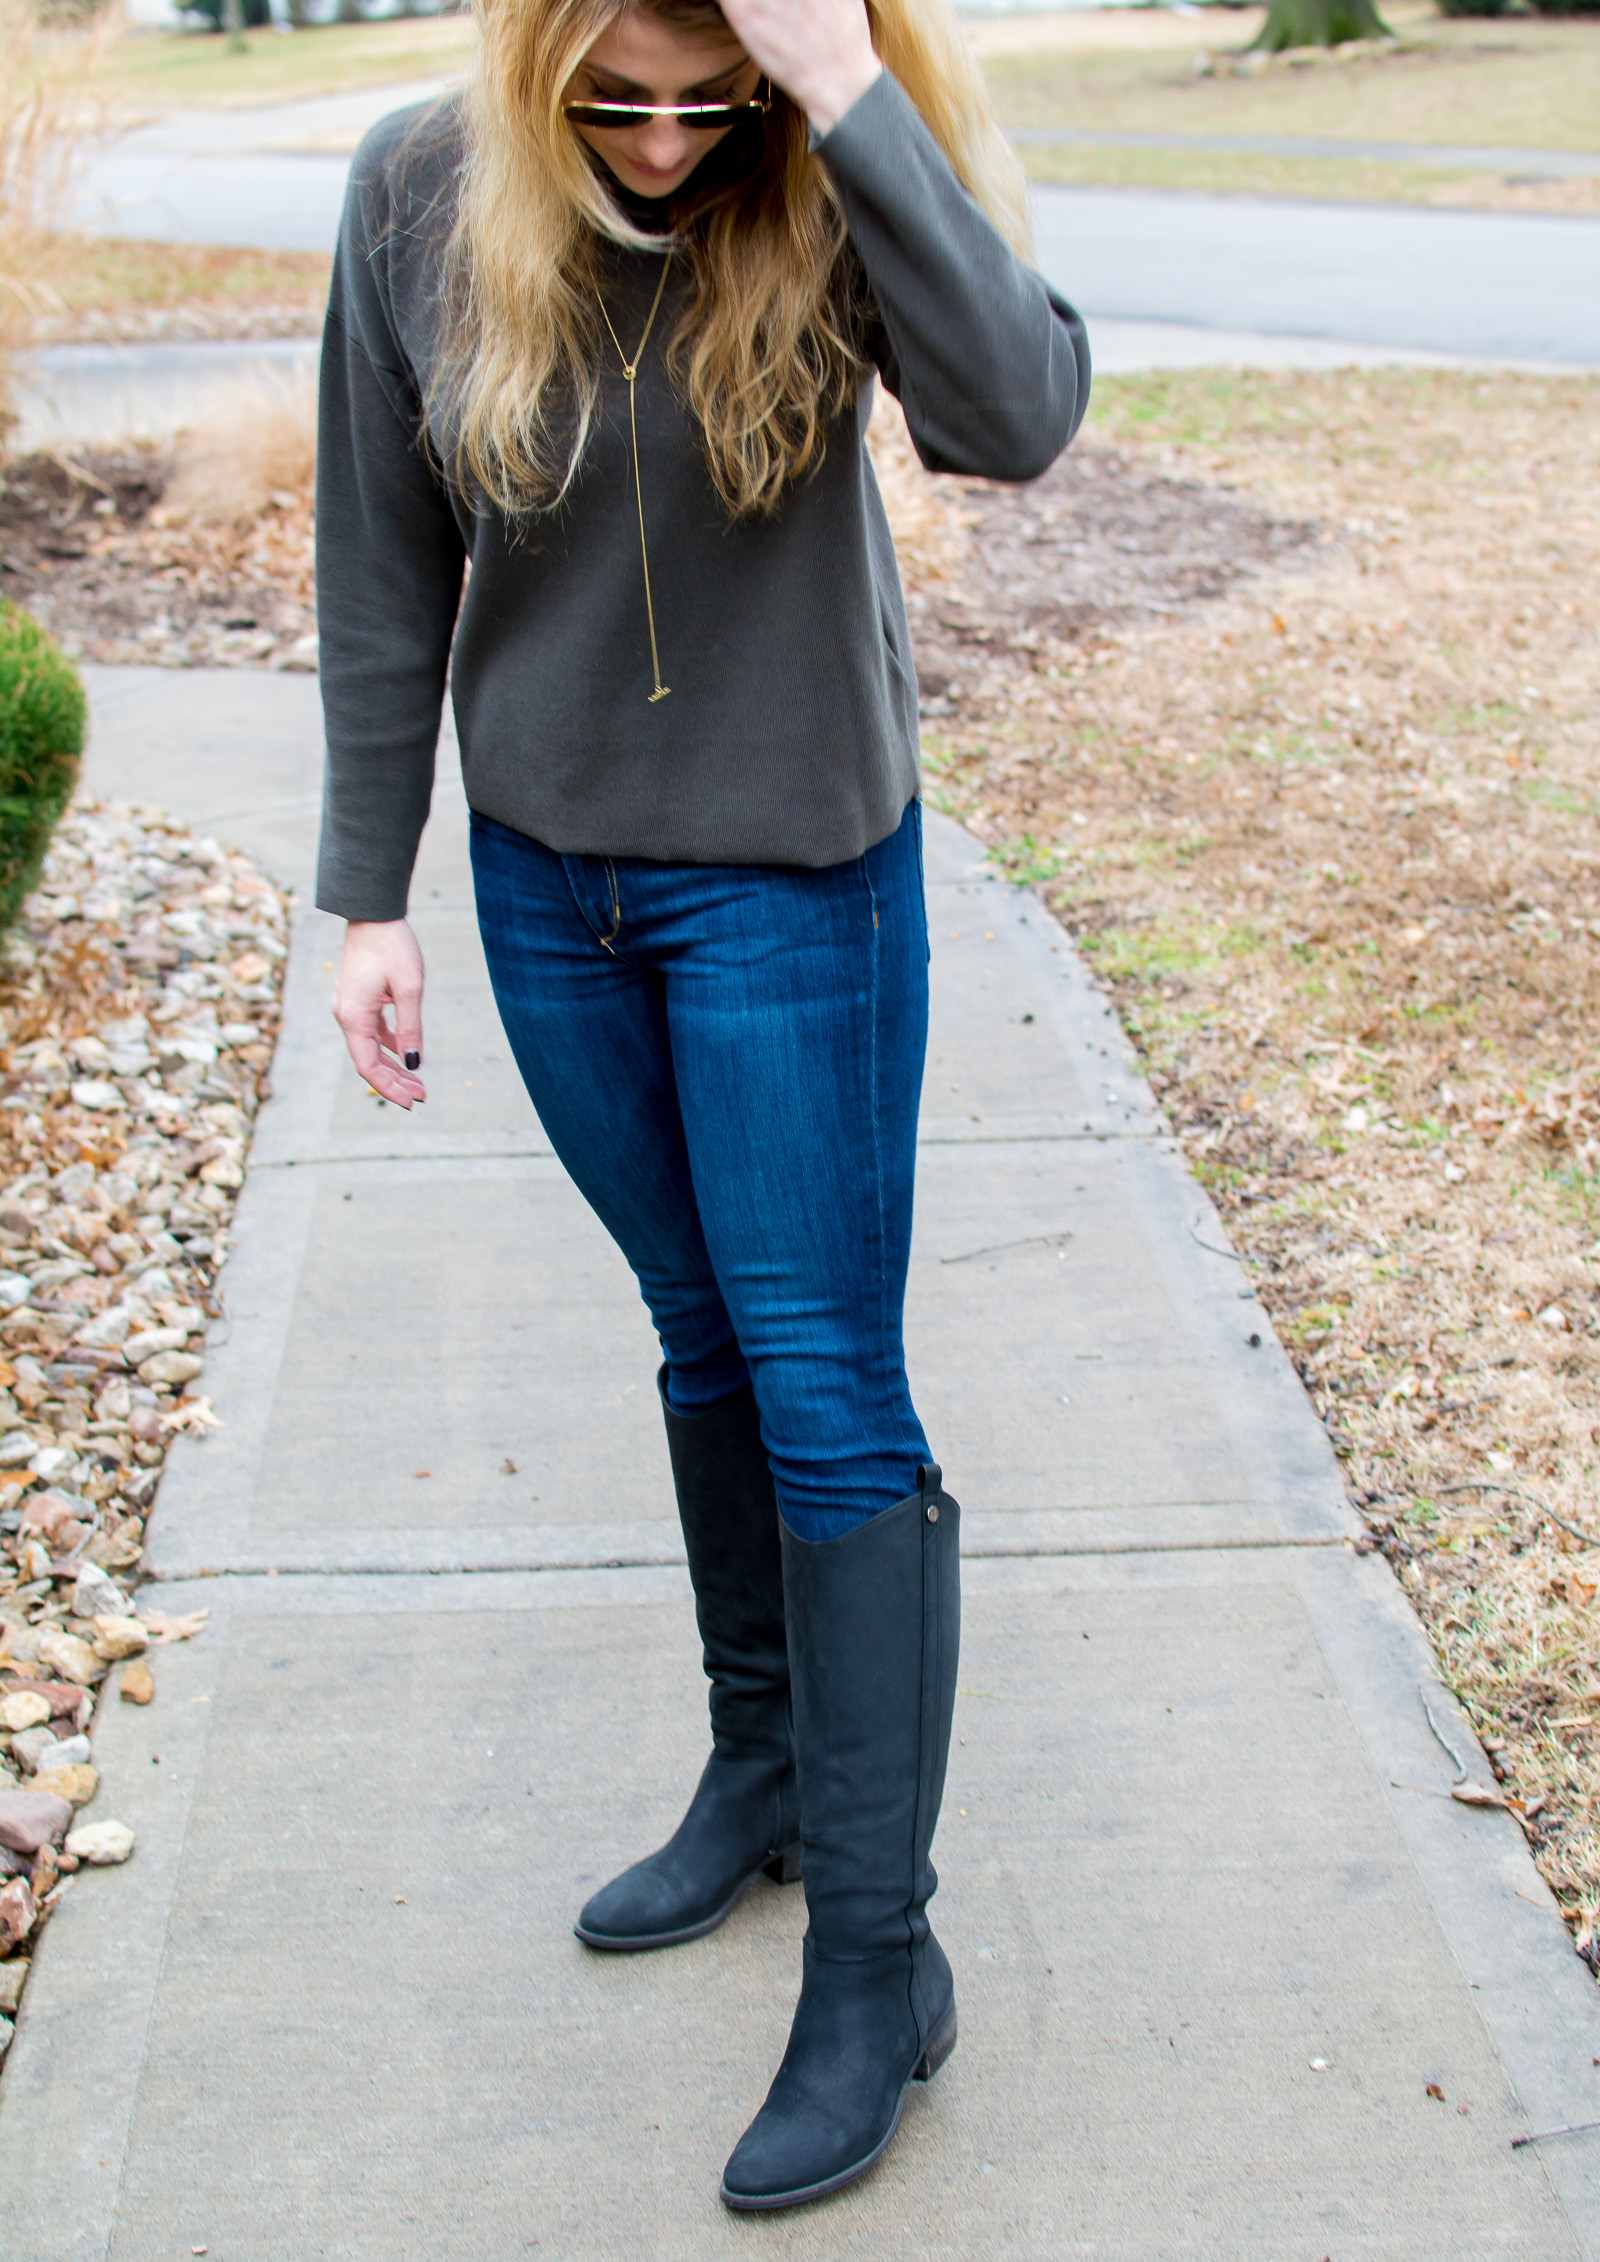 Olive Green Sweater + Black Riding 